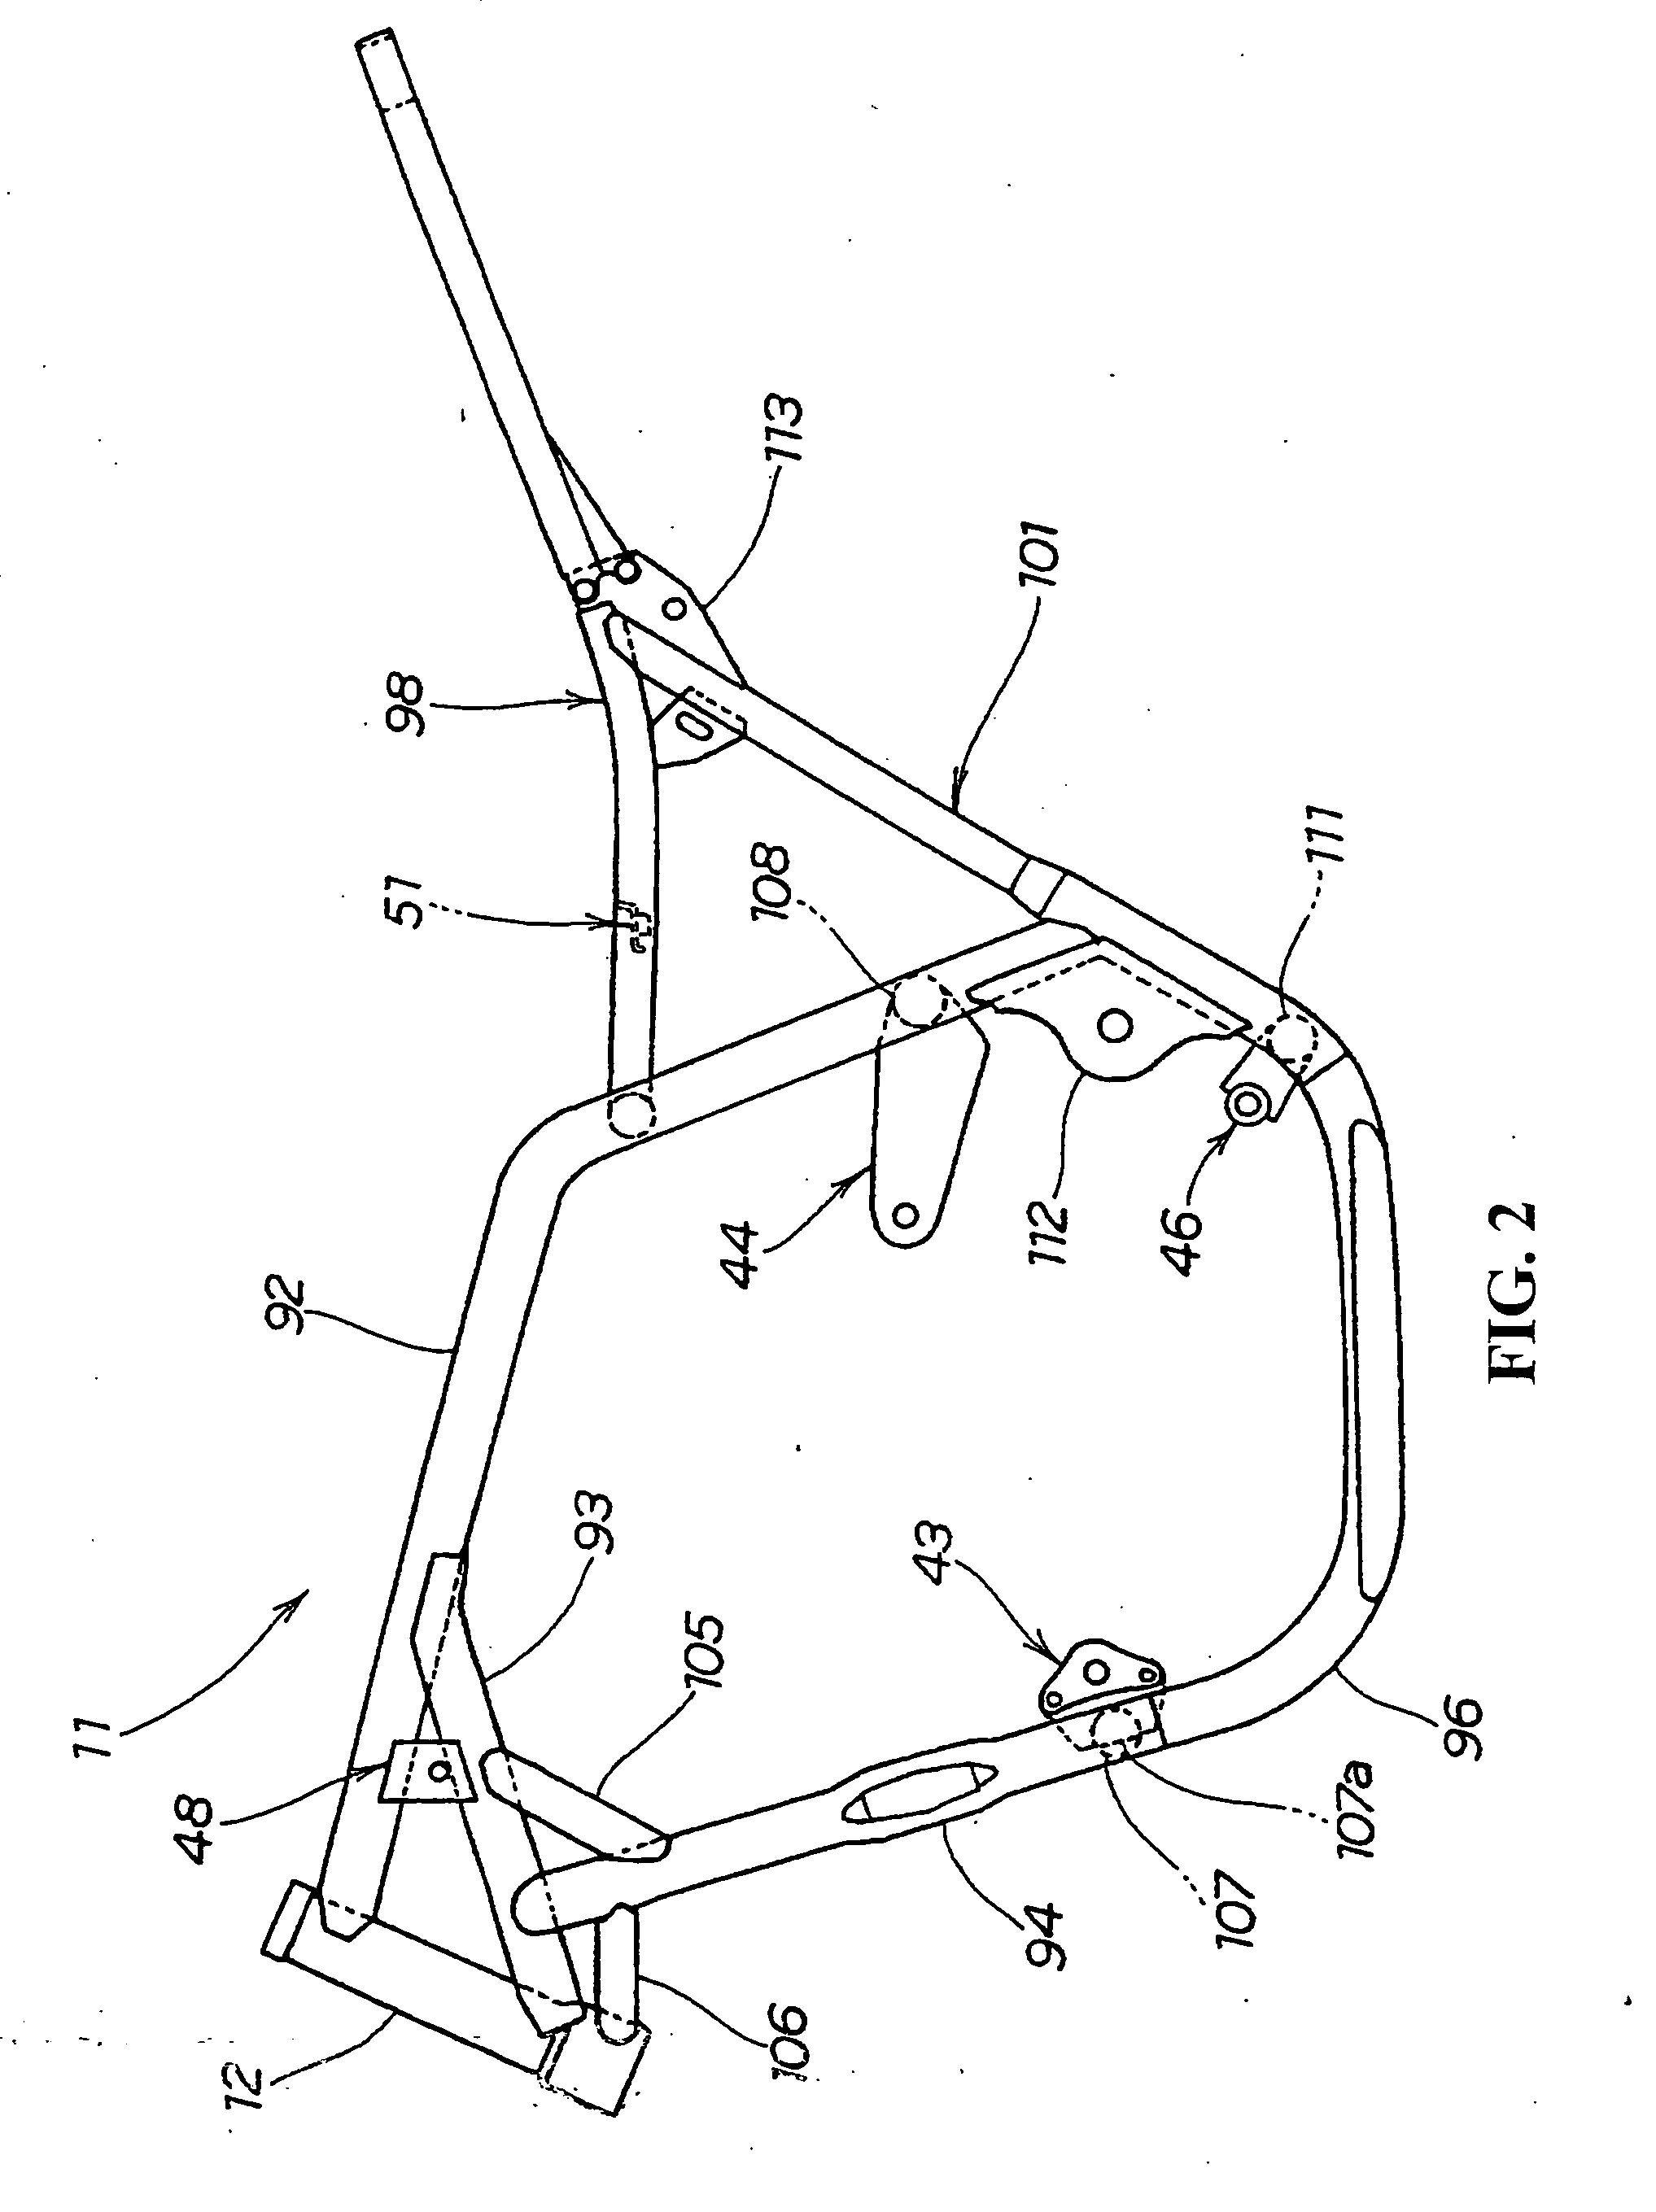 Structure of fuel pump installation area for two-wheeled vehicle